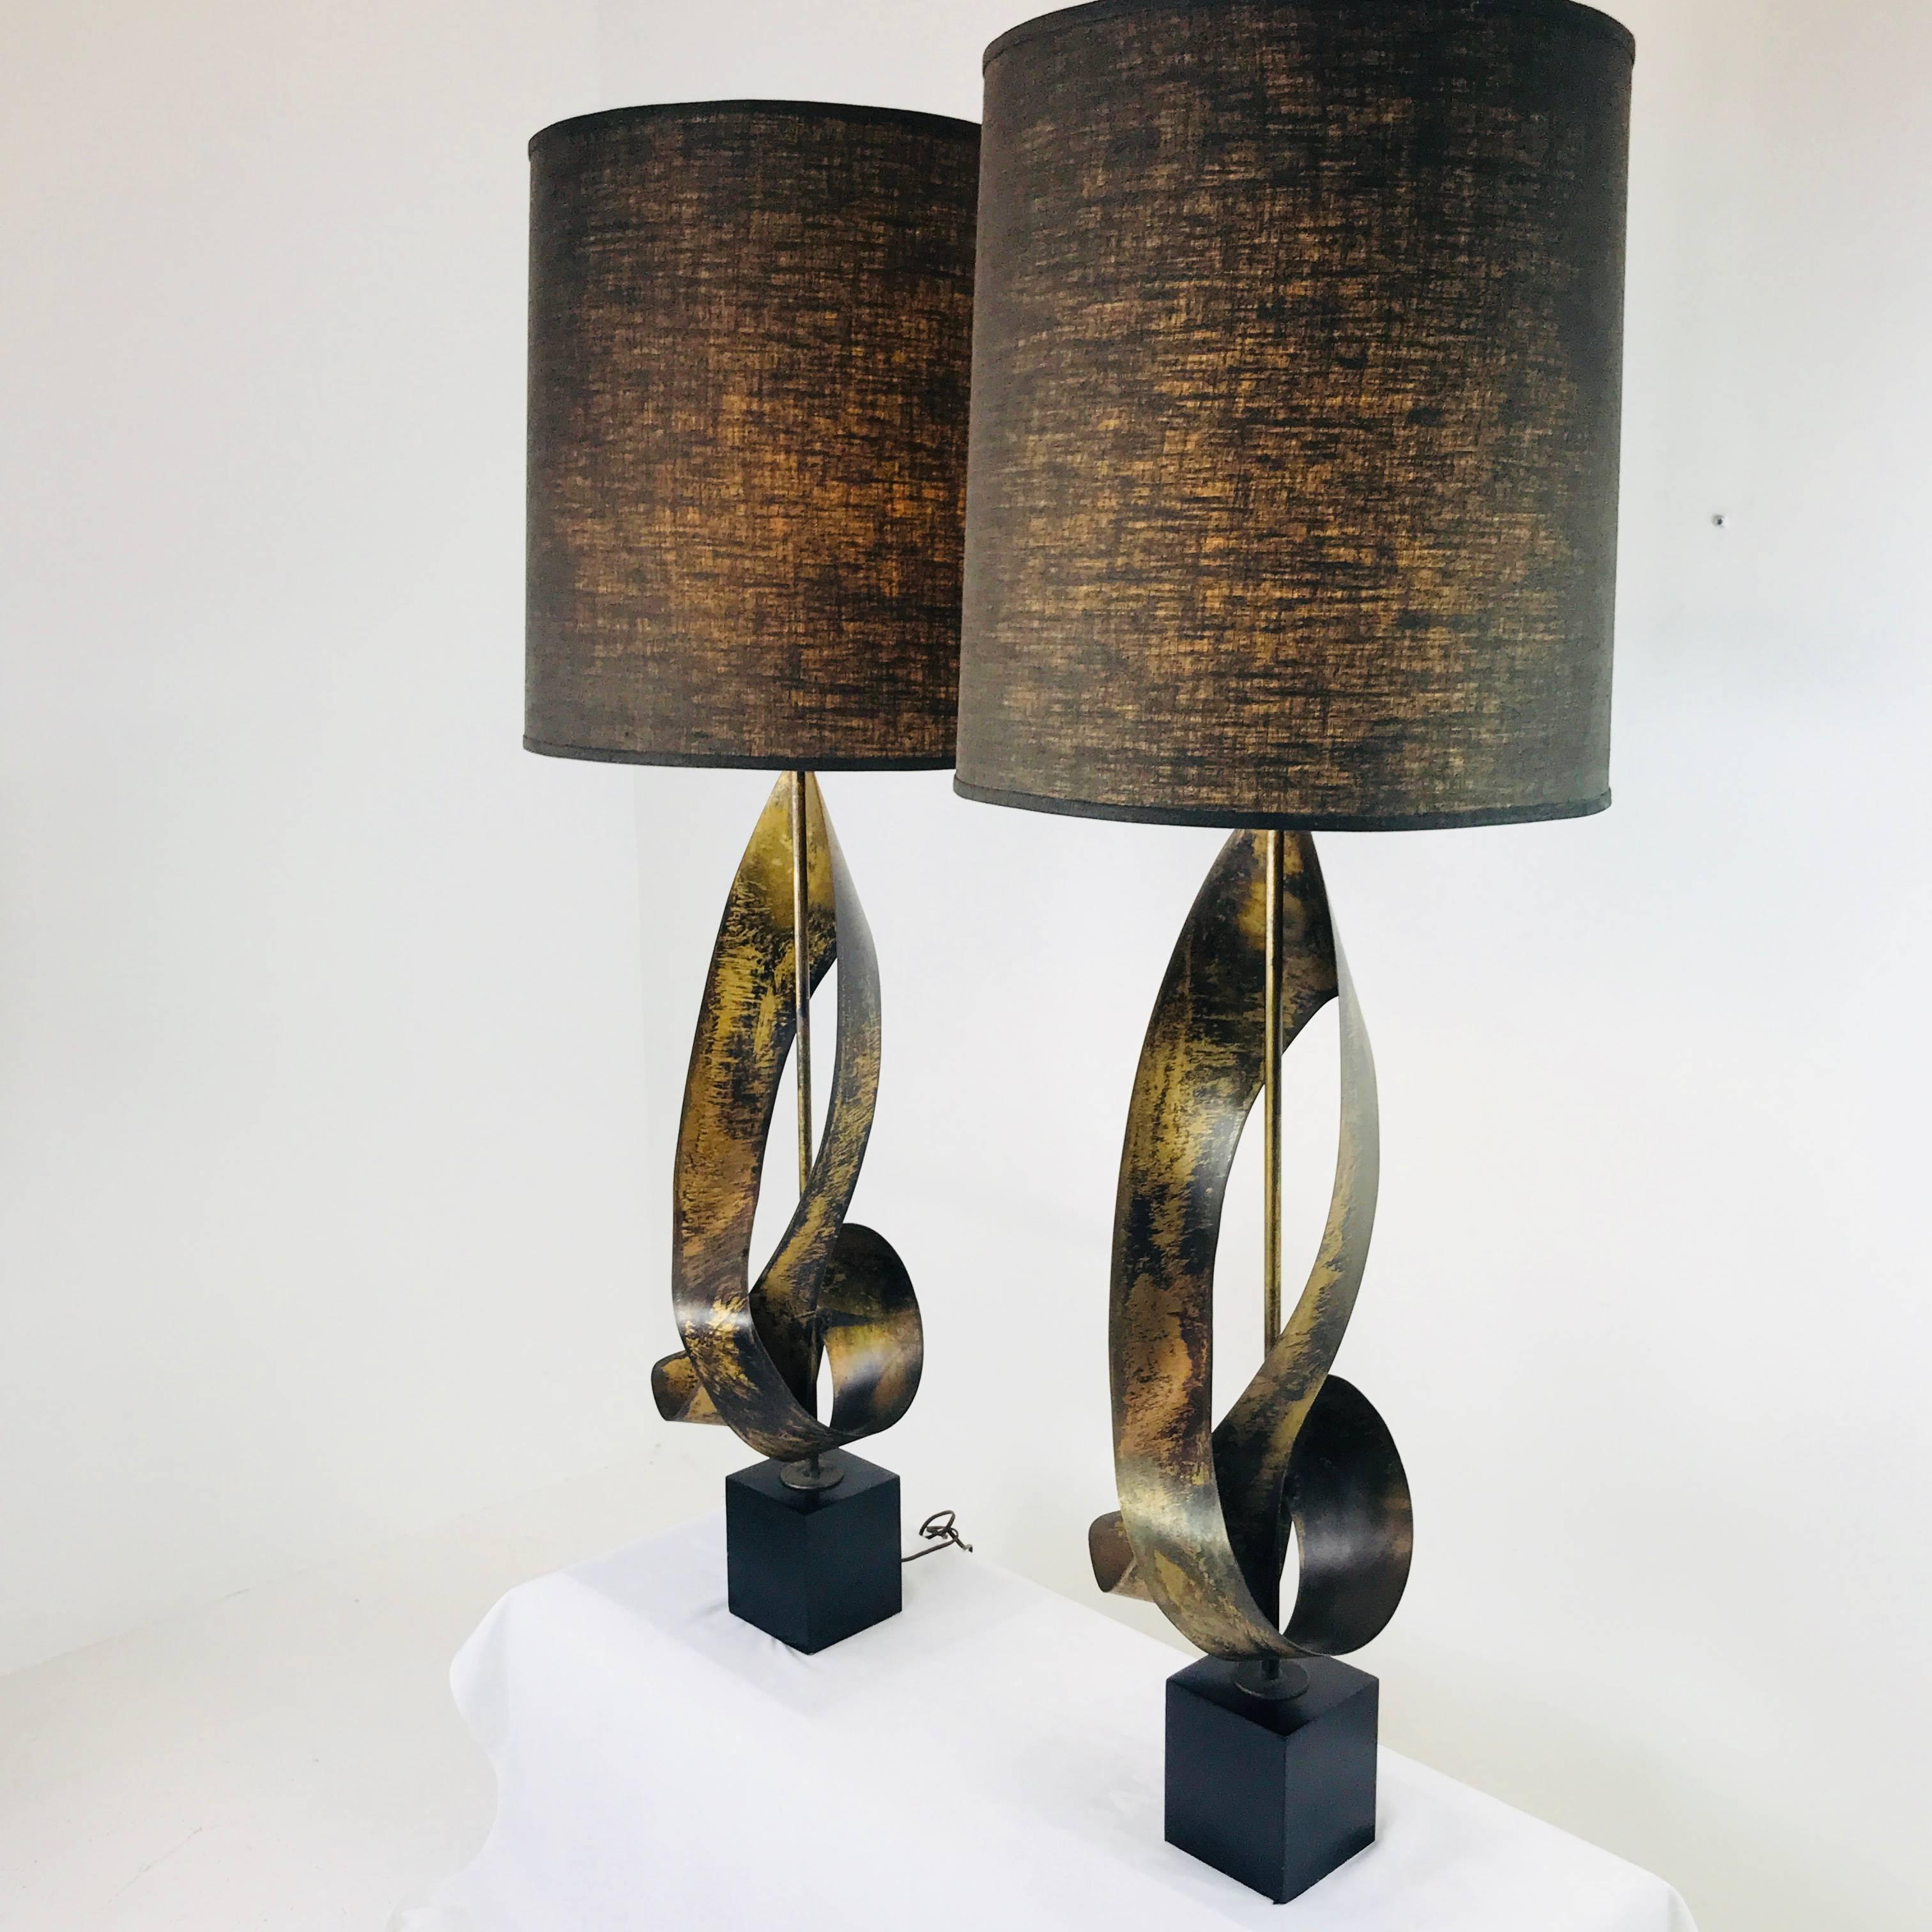 Pair of bronze sculptural Laurel lamps. In good vintage condition with wear due to age and use. Original wiring, circa 1960s.

Dimensions:
12